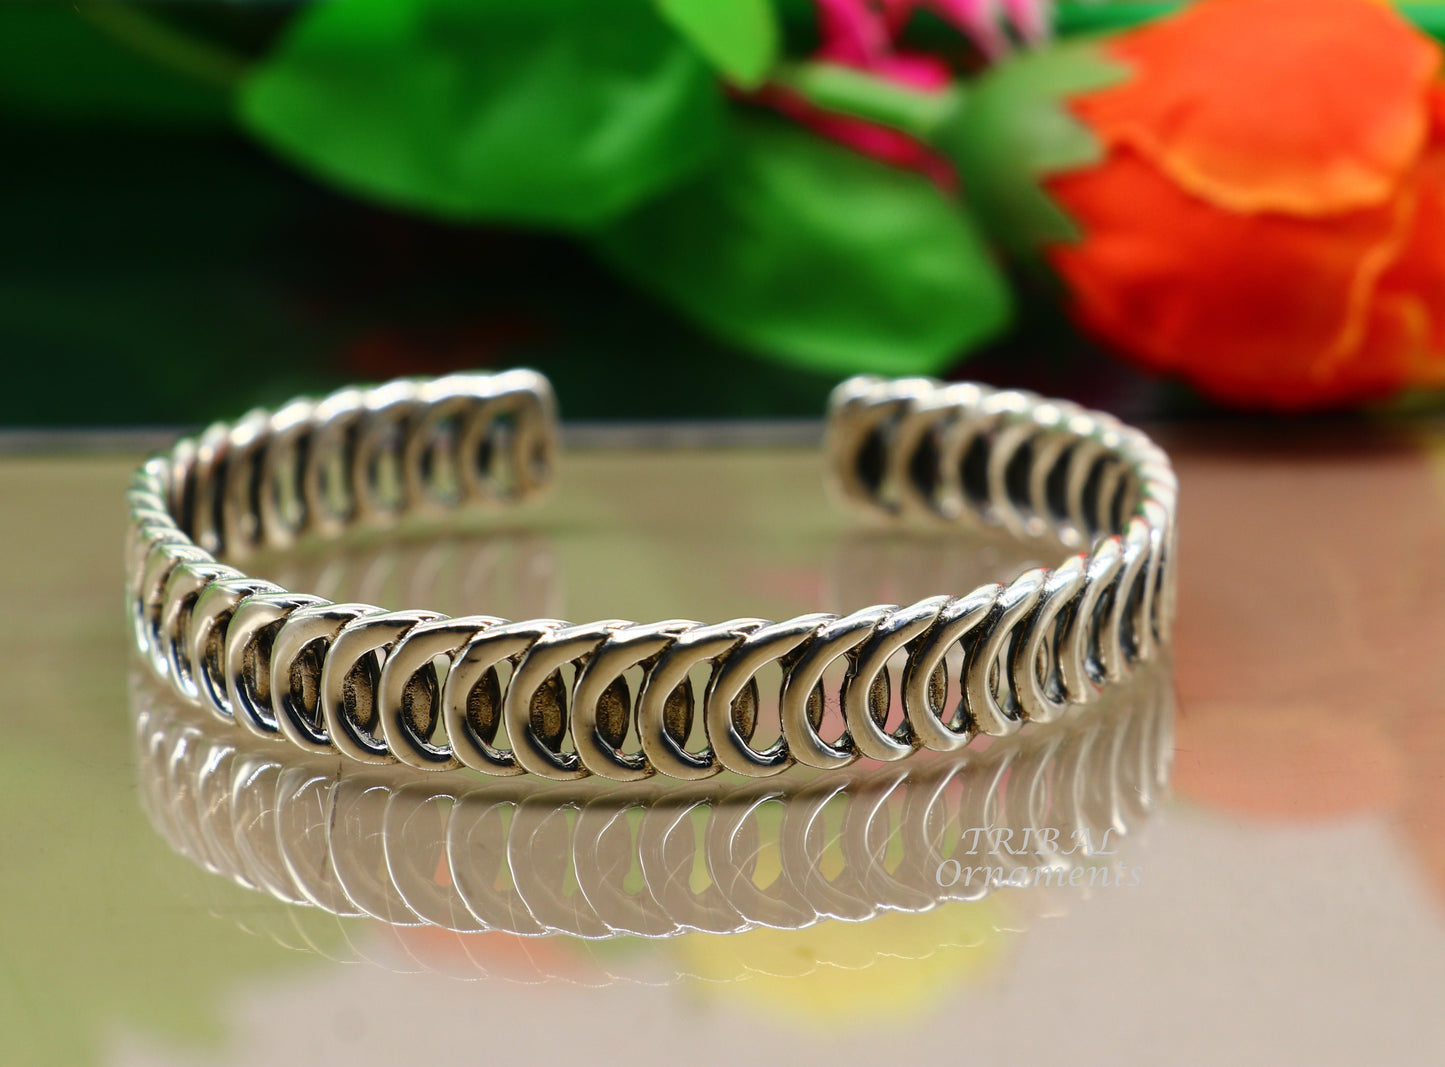 Vintage unique design stylish cuff kada adjustable bracelet, 925 sterling silver wrist jewelry for boy's and girl's, best gifting  cuff108 - TRIBAL ORNAMENTS